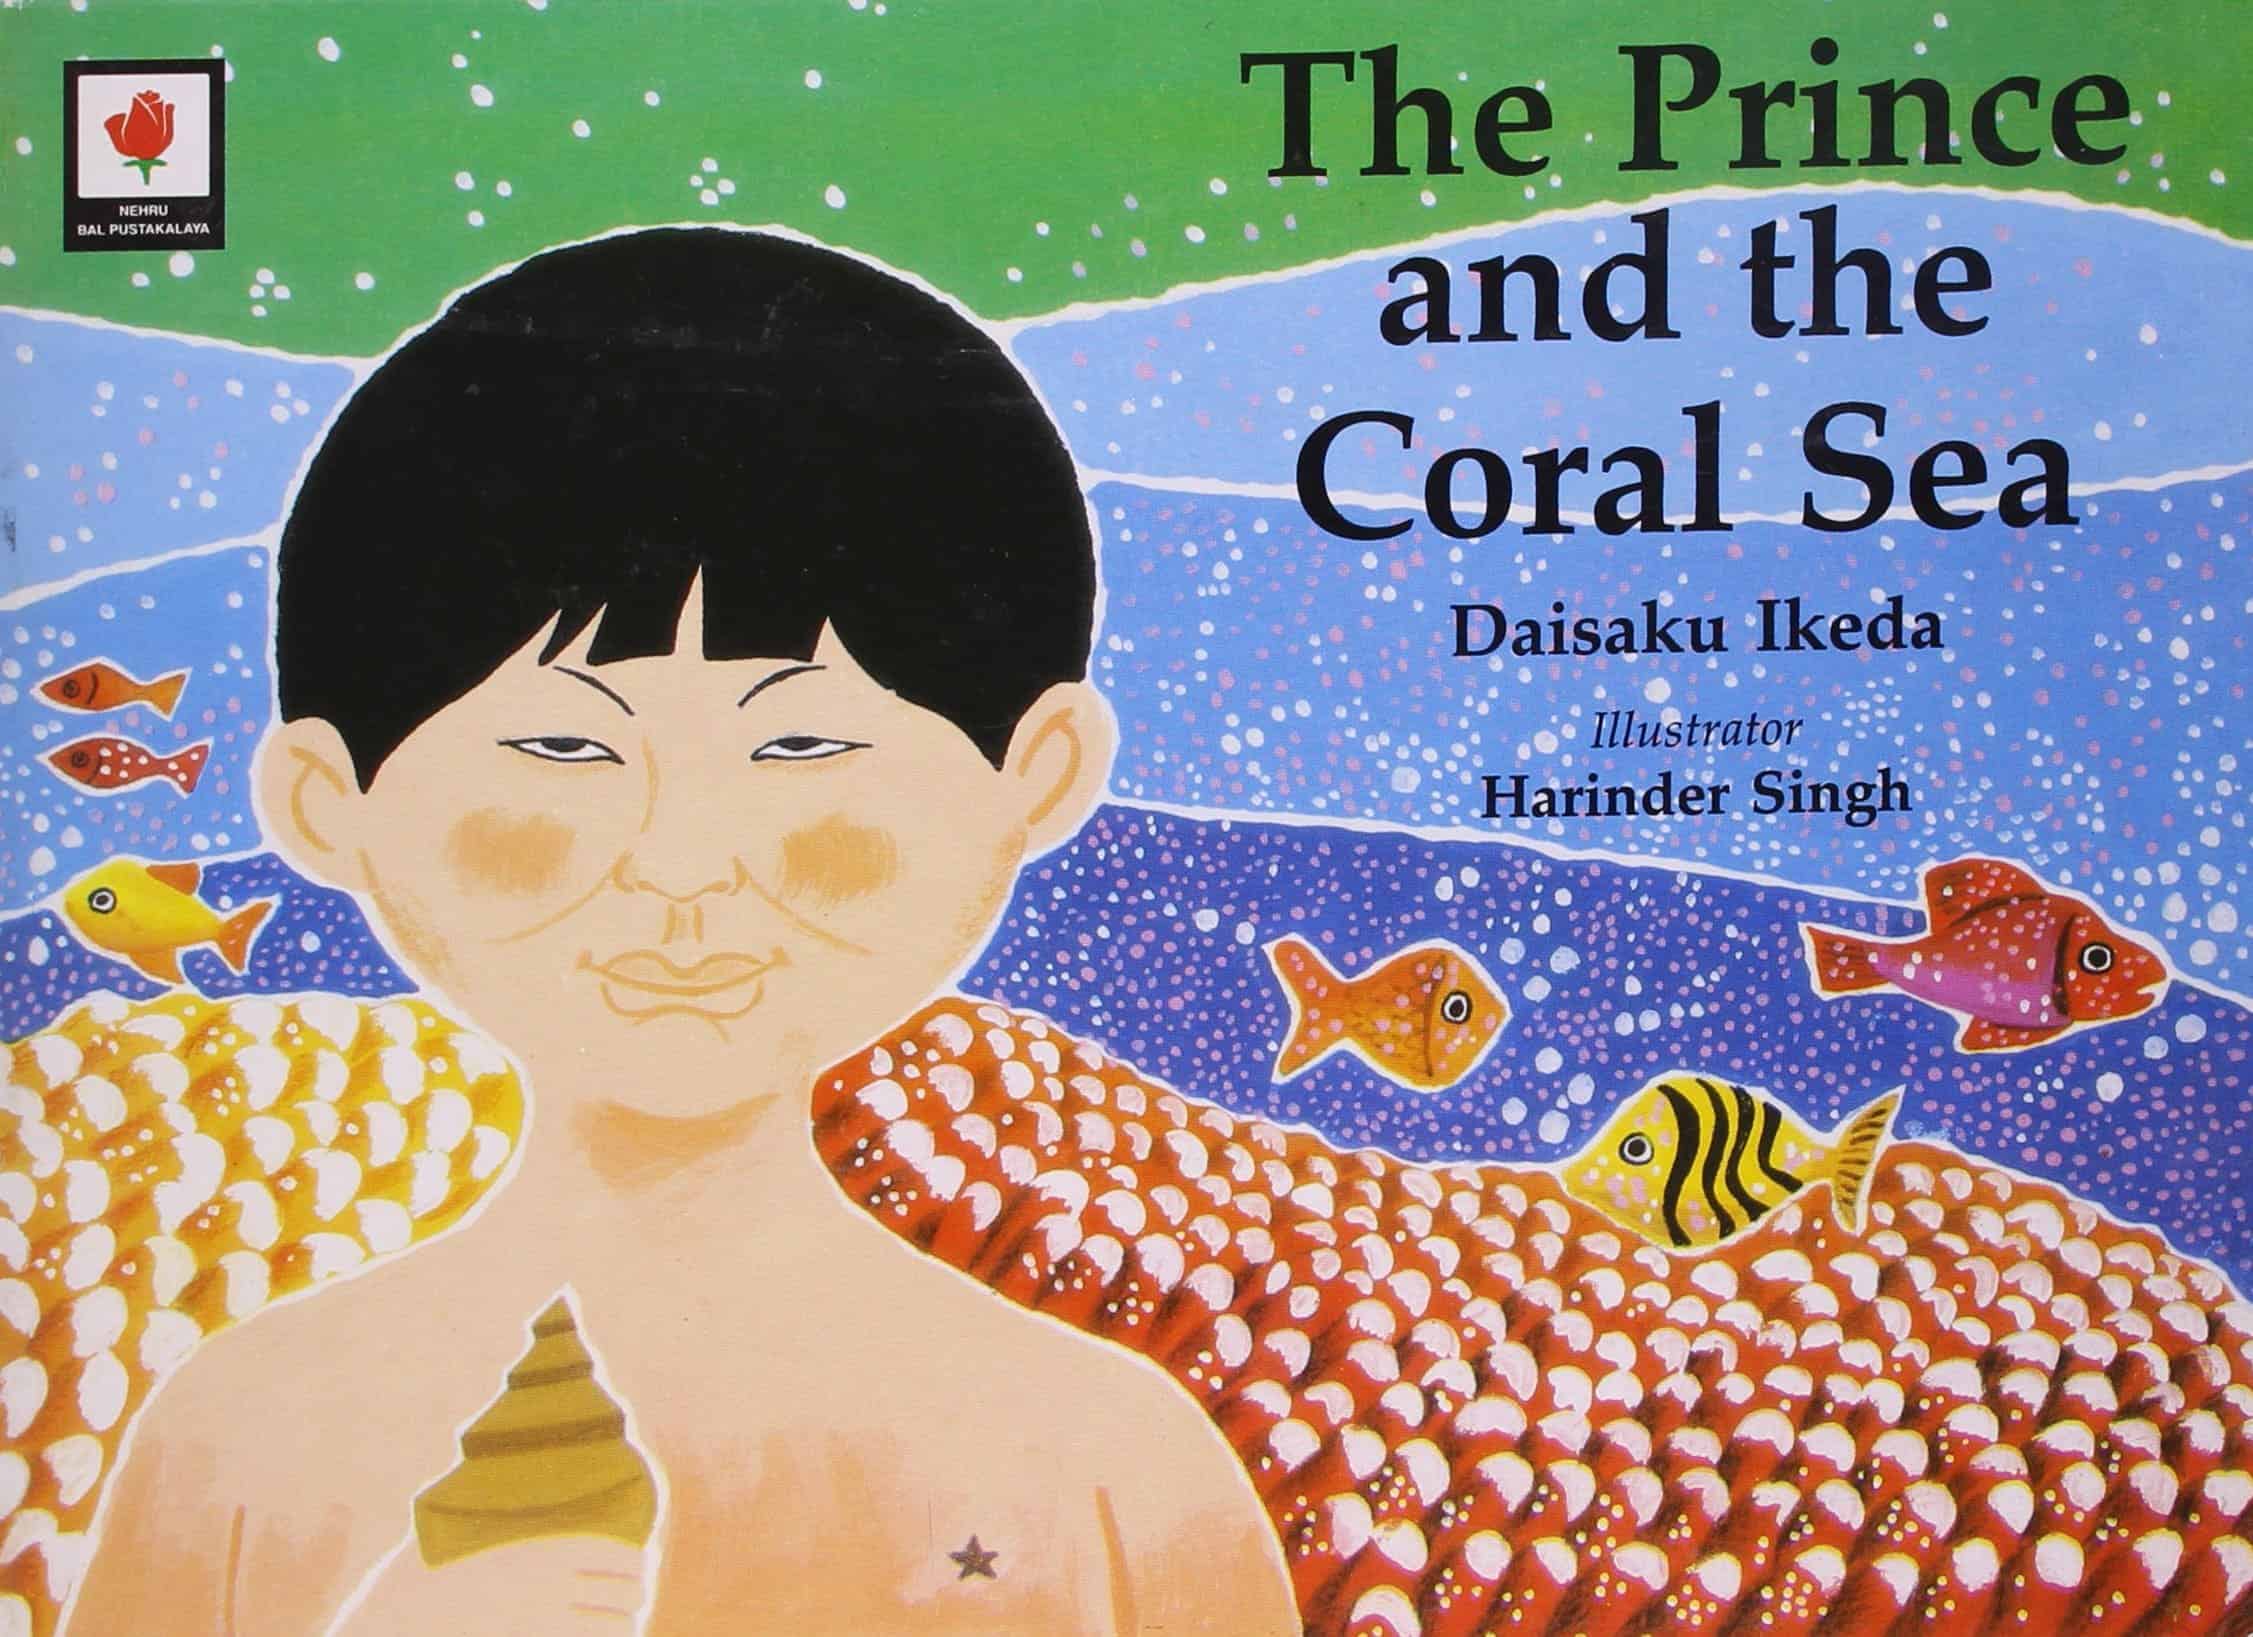 The Prince and the Coral Sea